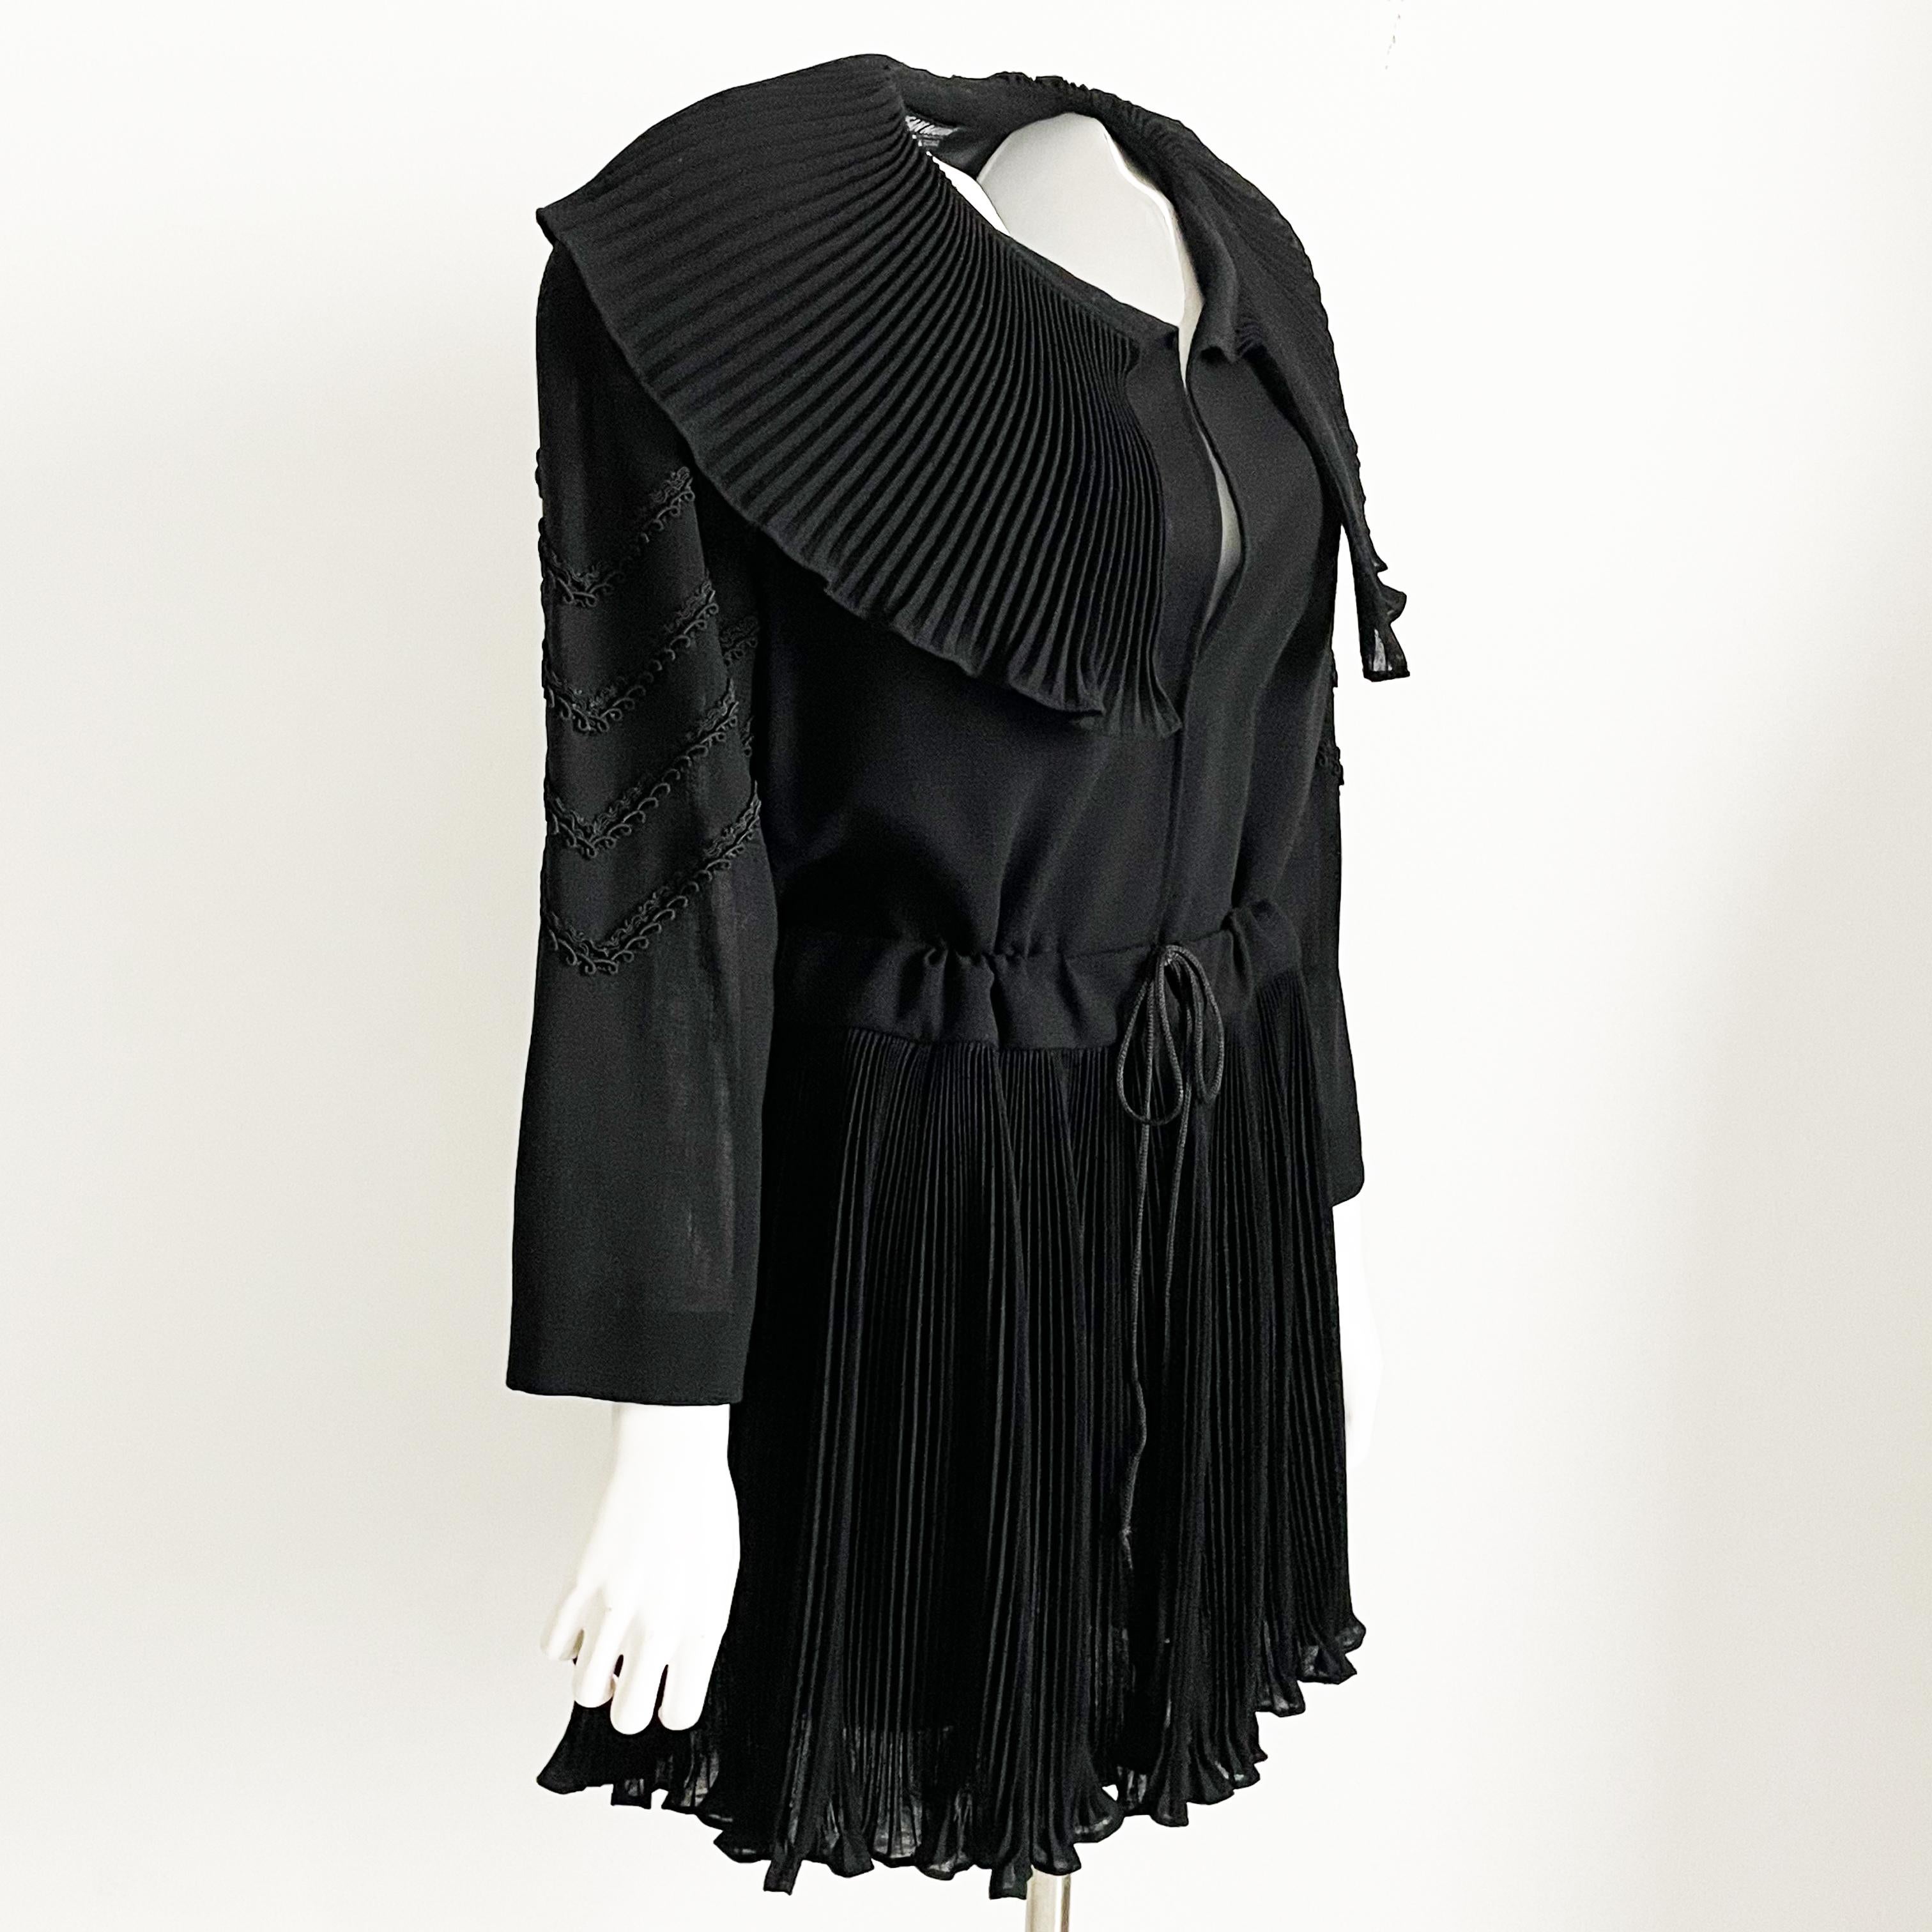 Authentic, preowned, vintage Jean Muir black wool jacket with micro pleat collar, likely made in the 80s. Romantic and sophisticated, it features a micro-pleat collar and hem, with Soutache detailing on the sheer crepe sleeves. 

A fabulous vintage